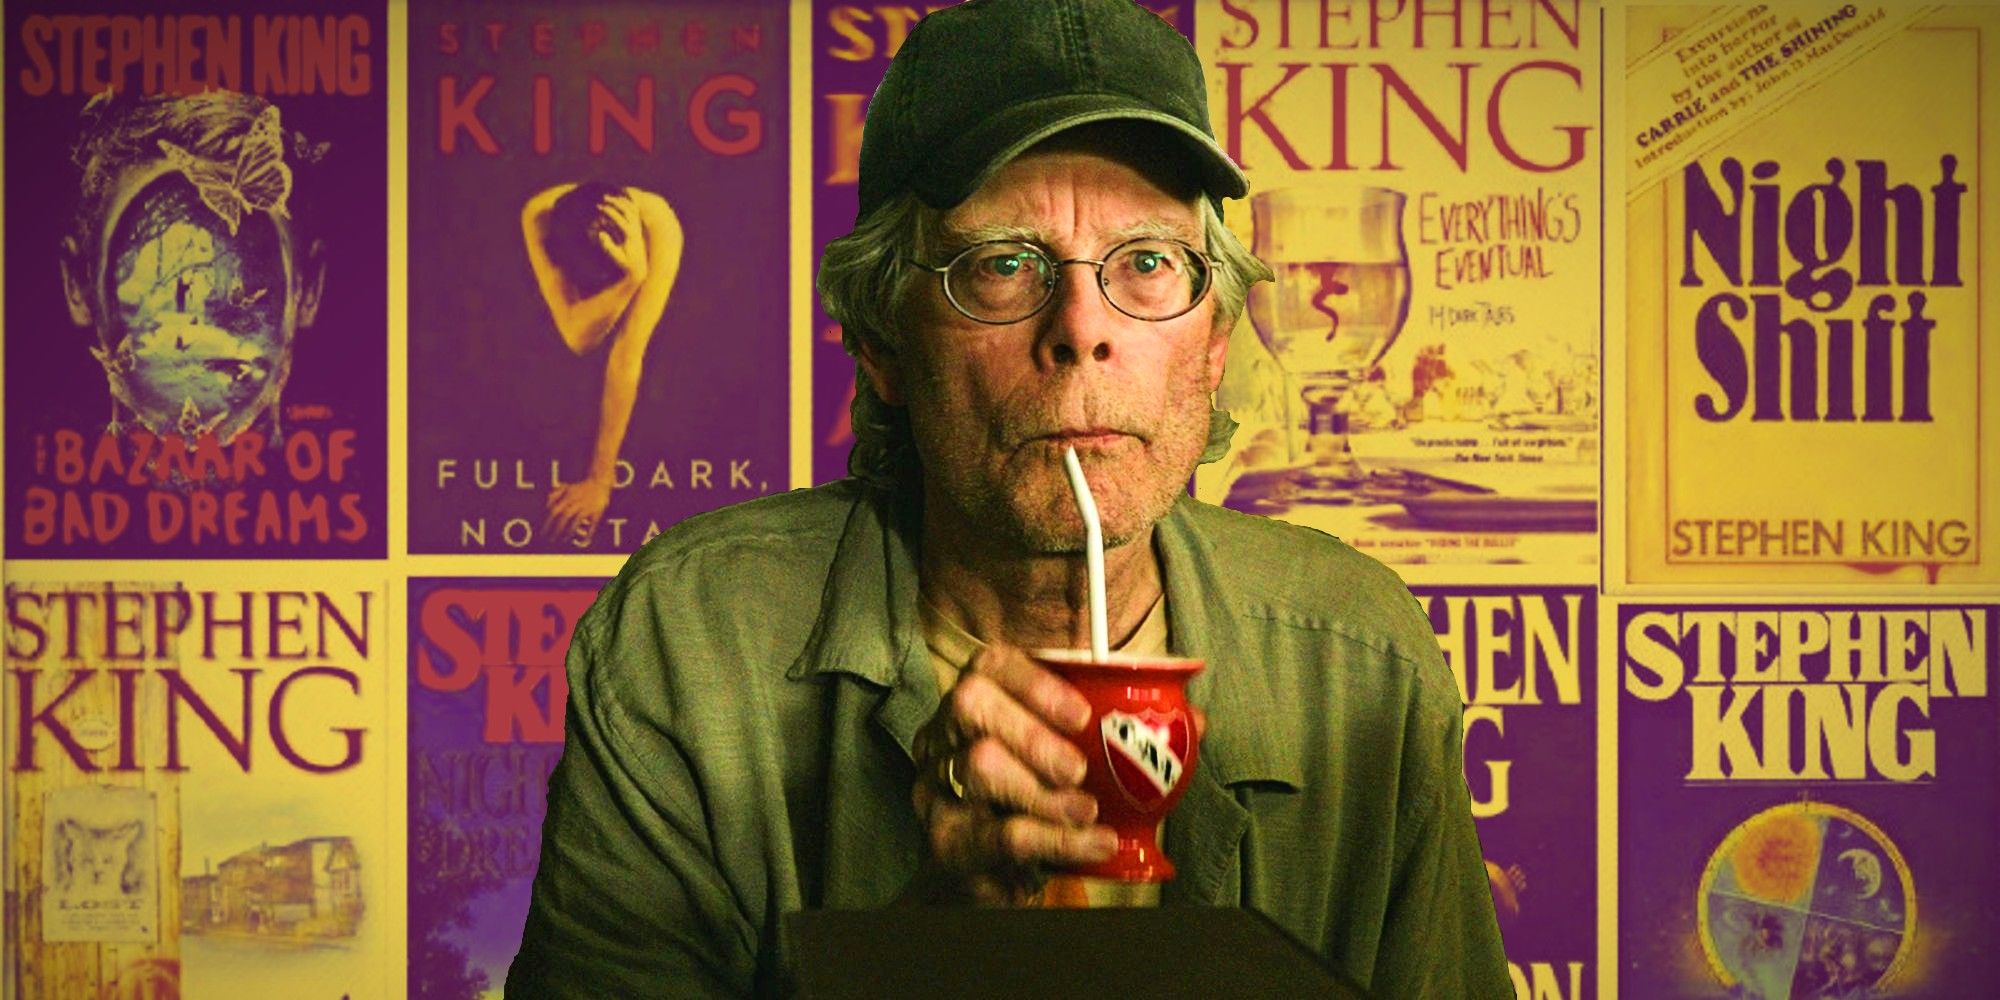 Stephen King with his short story collections